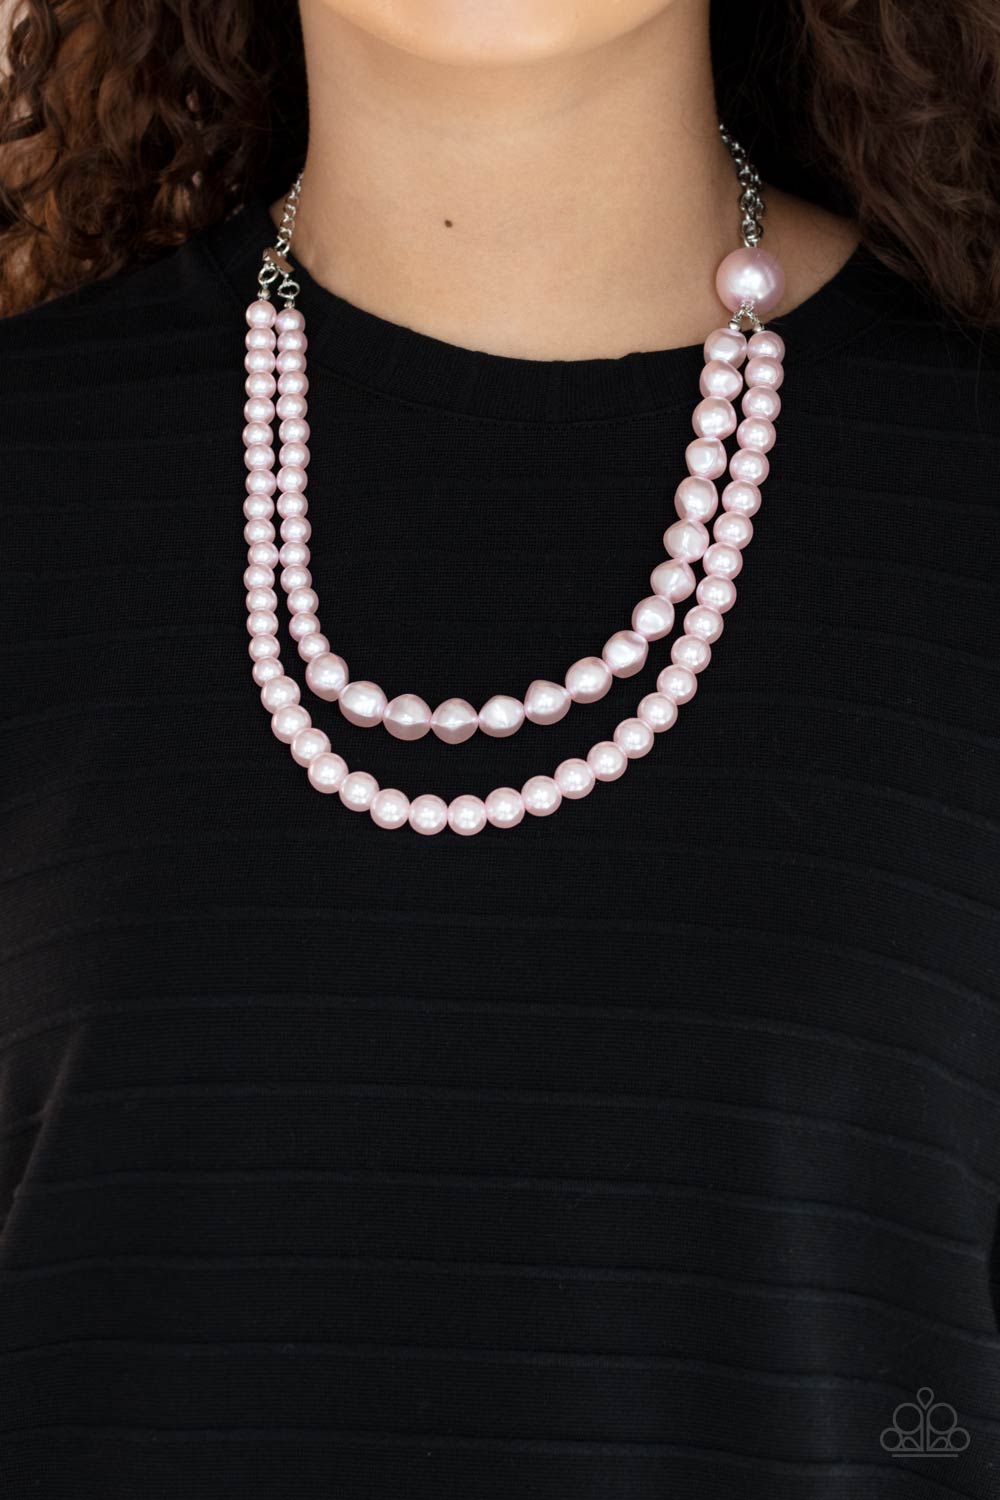 Paparazzi Accessories: Challenge Accepted - Gold Pearl Necklace